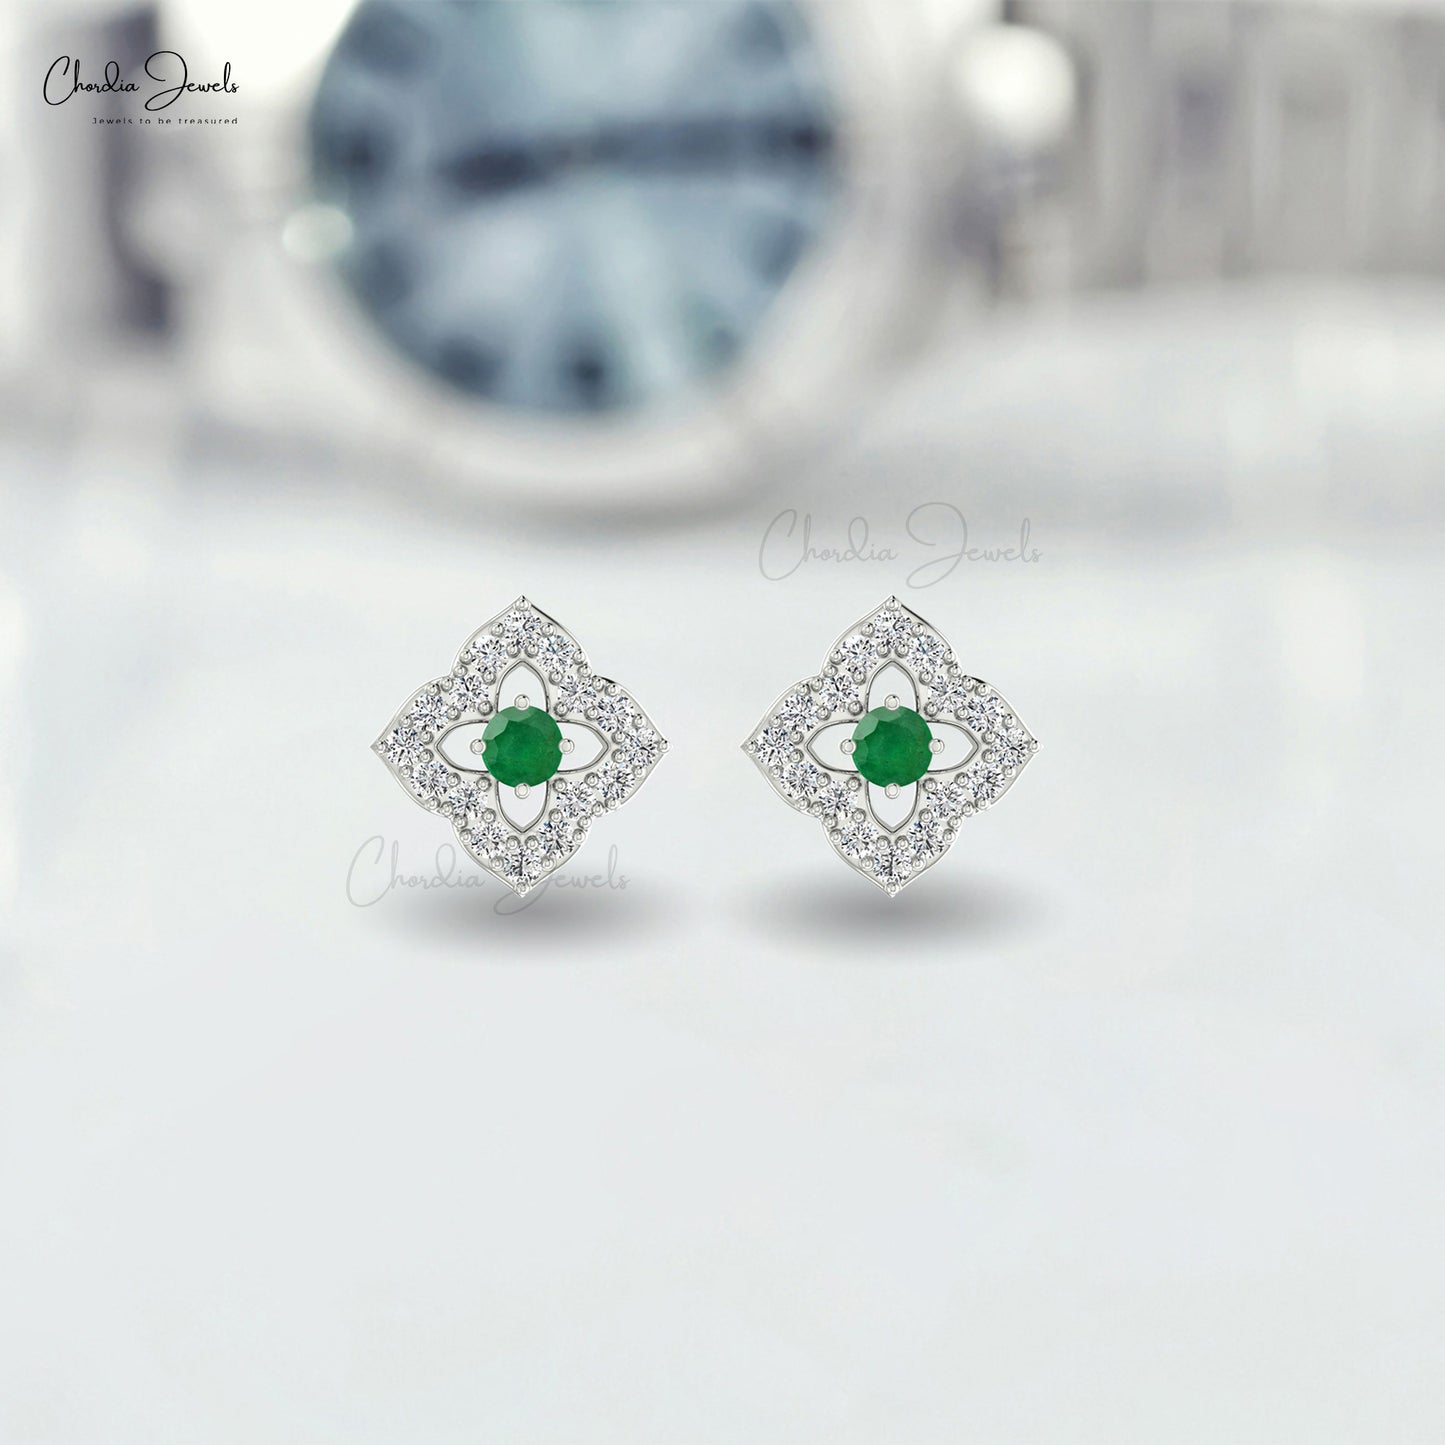 Load image into Gallery viewer, Real 14k Gold Green Emerald Floral Studs 0.90mm Round Cut White Diamond Pave Set Art Deco Genuine Earrings For Her
